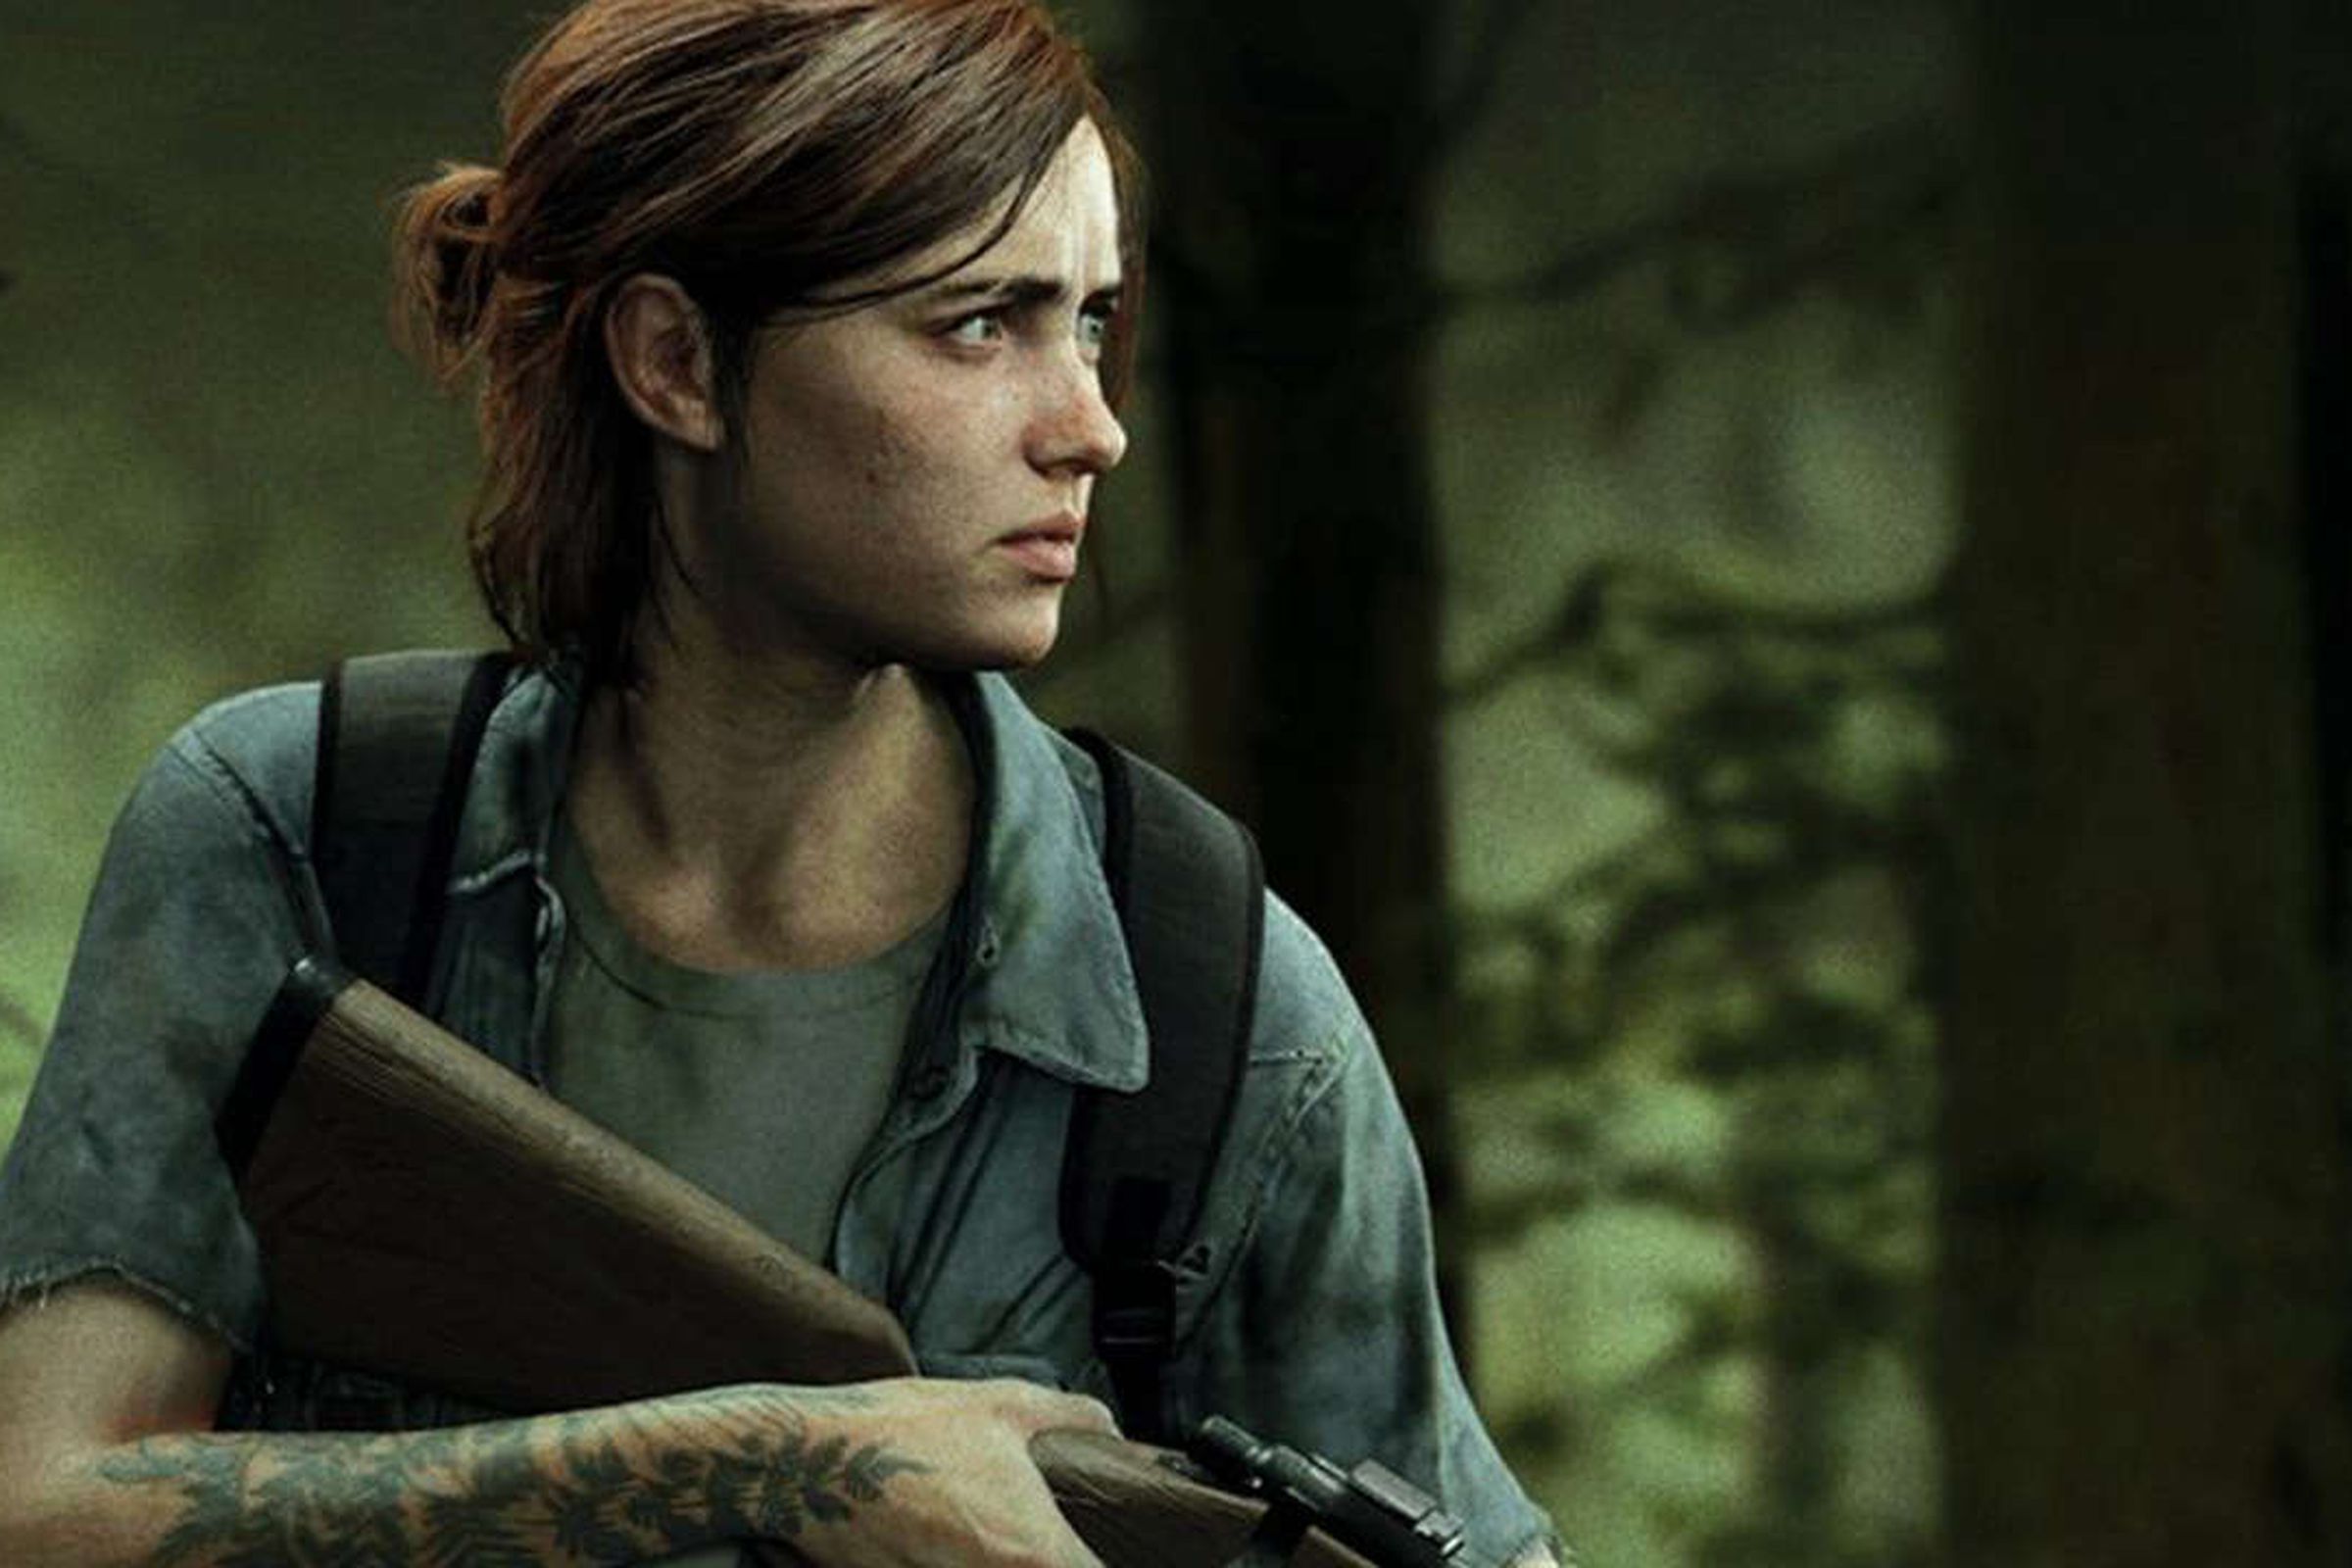 Ellie, a tattoo visible on her arm, holds a gun and watches something in the distance warily.